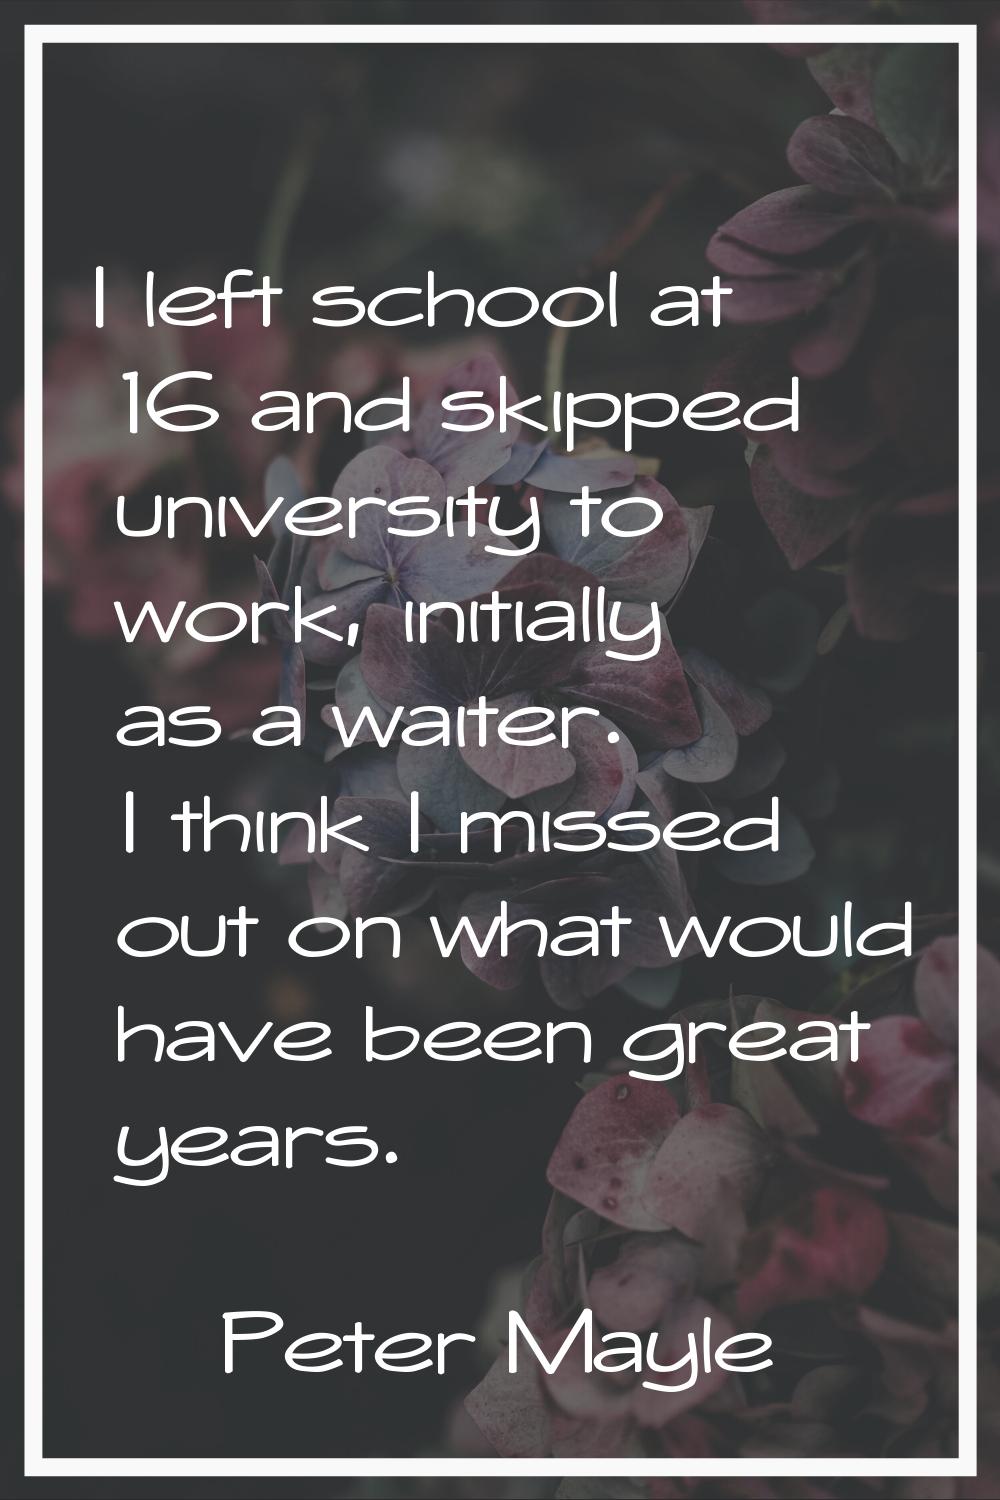 I left school at 16 and skipped university to work, initially as a waiter. I think I missed out on 